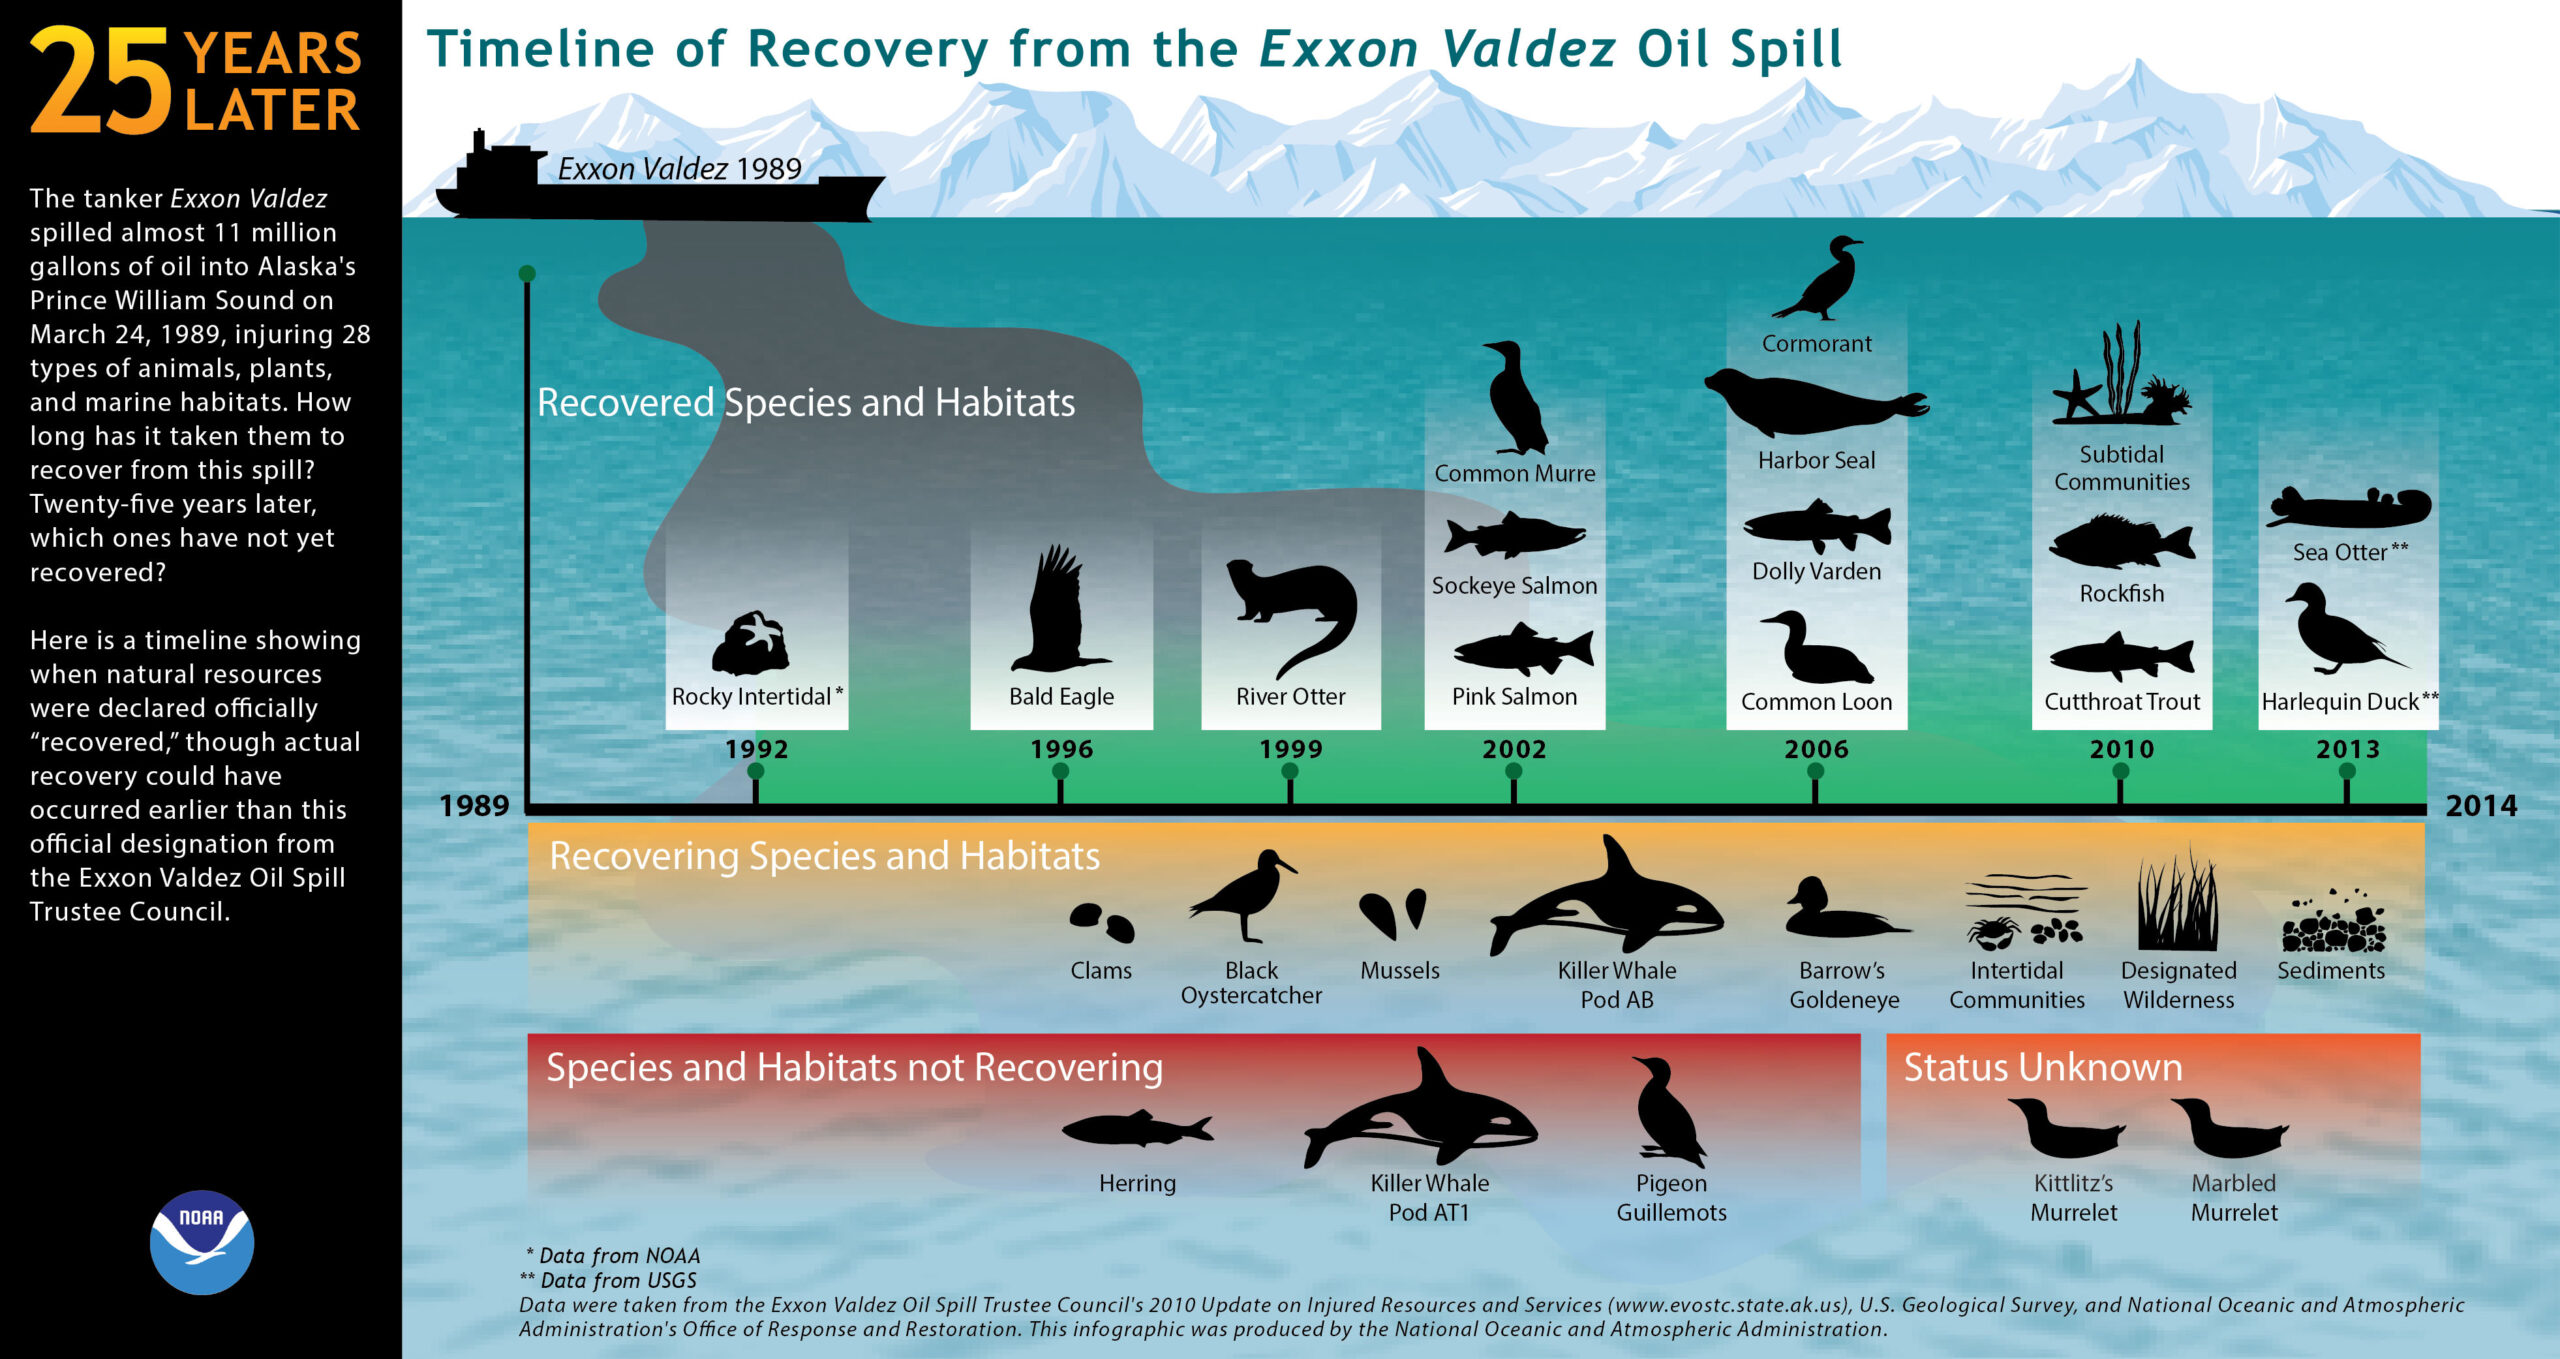 Graphic showing species recovery in the first 25 years following the Exxon Valdez oil spill. The graphic shows that while many species were recovered or recovering by 2014, a few were not. Species not covered included herring (a type of ocean fish), Pigeon guillemots (a type of seabird), and the killer whale pod AT1. Two species of murrelets (a type of bird) had an unknown status.